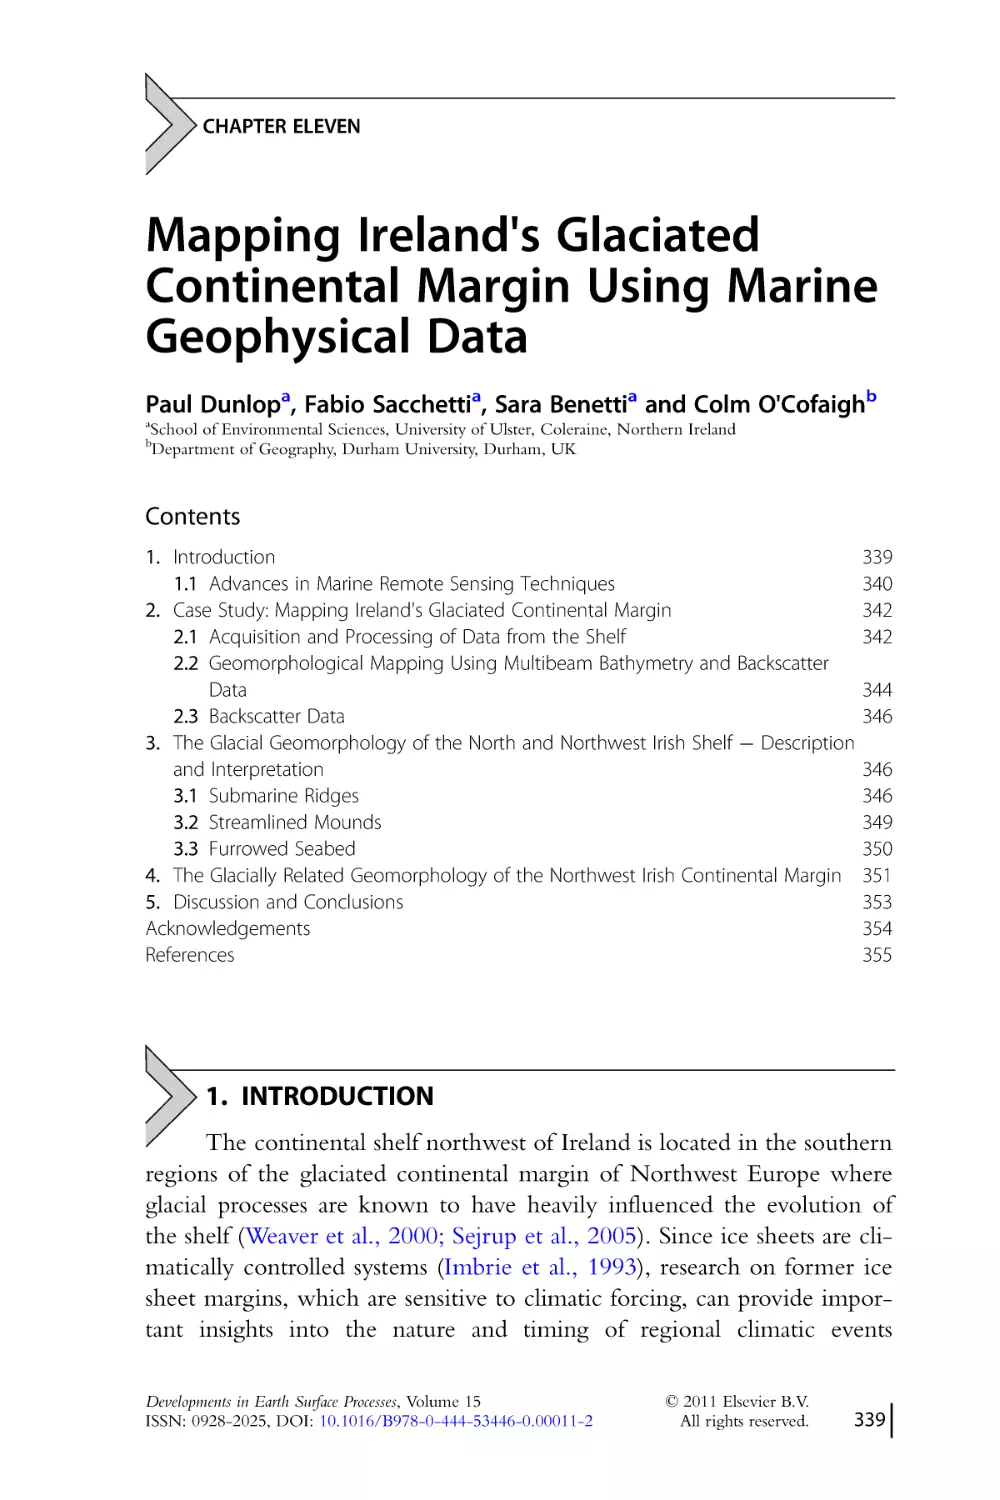 CHAPTER ELEVEN.
Mapping Ireland's Glaciated
Continental Margin Using Marine
Geophysical Data
1. Introduction